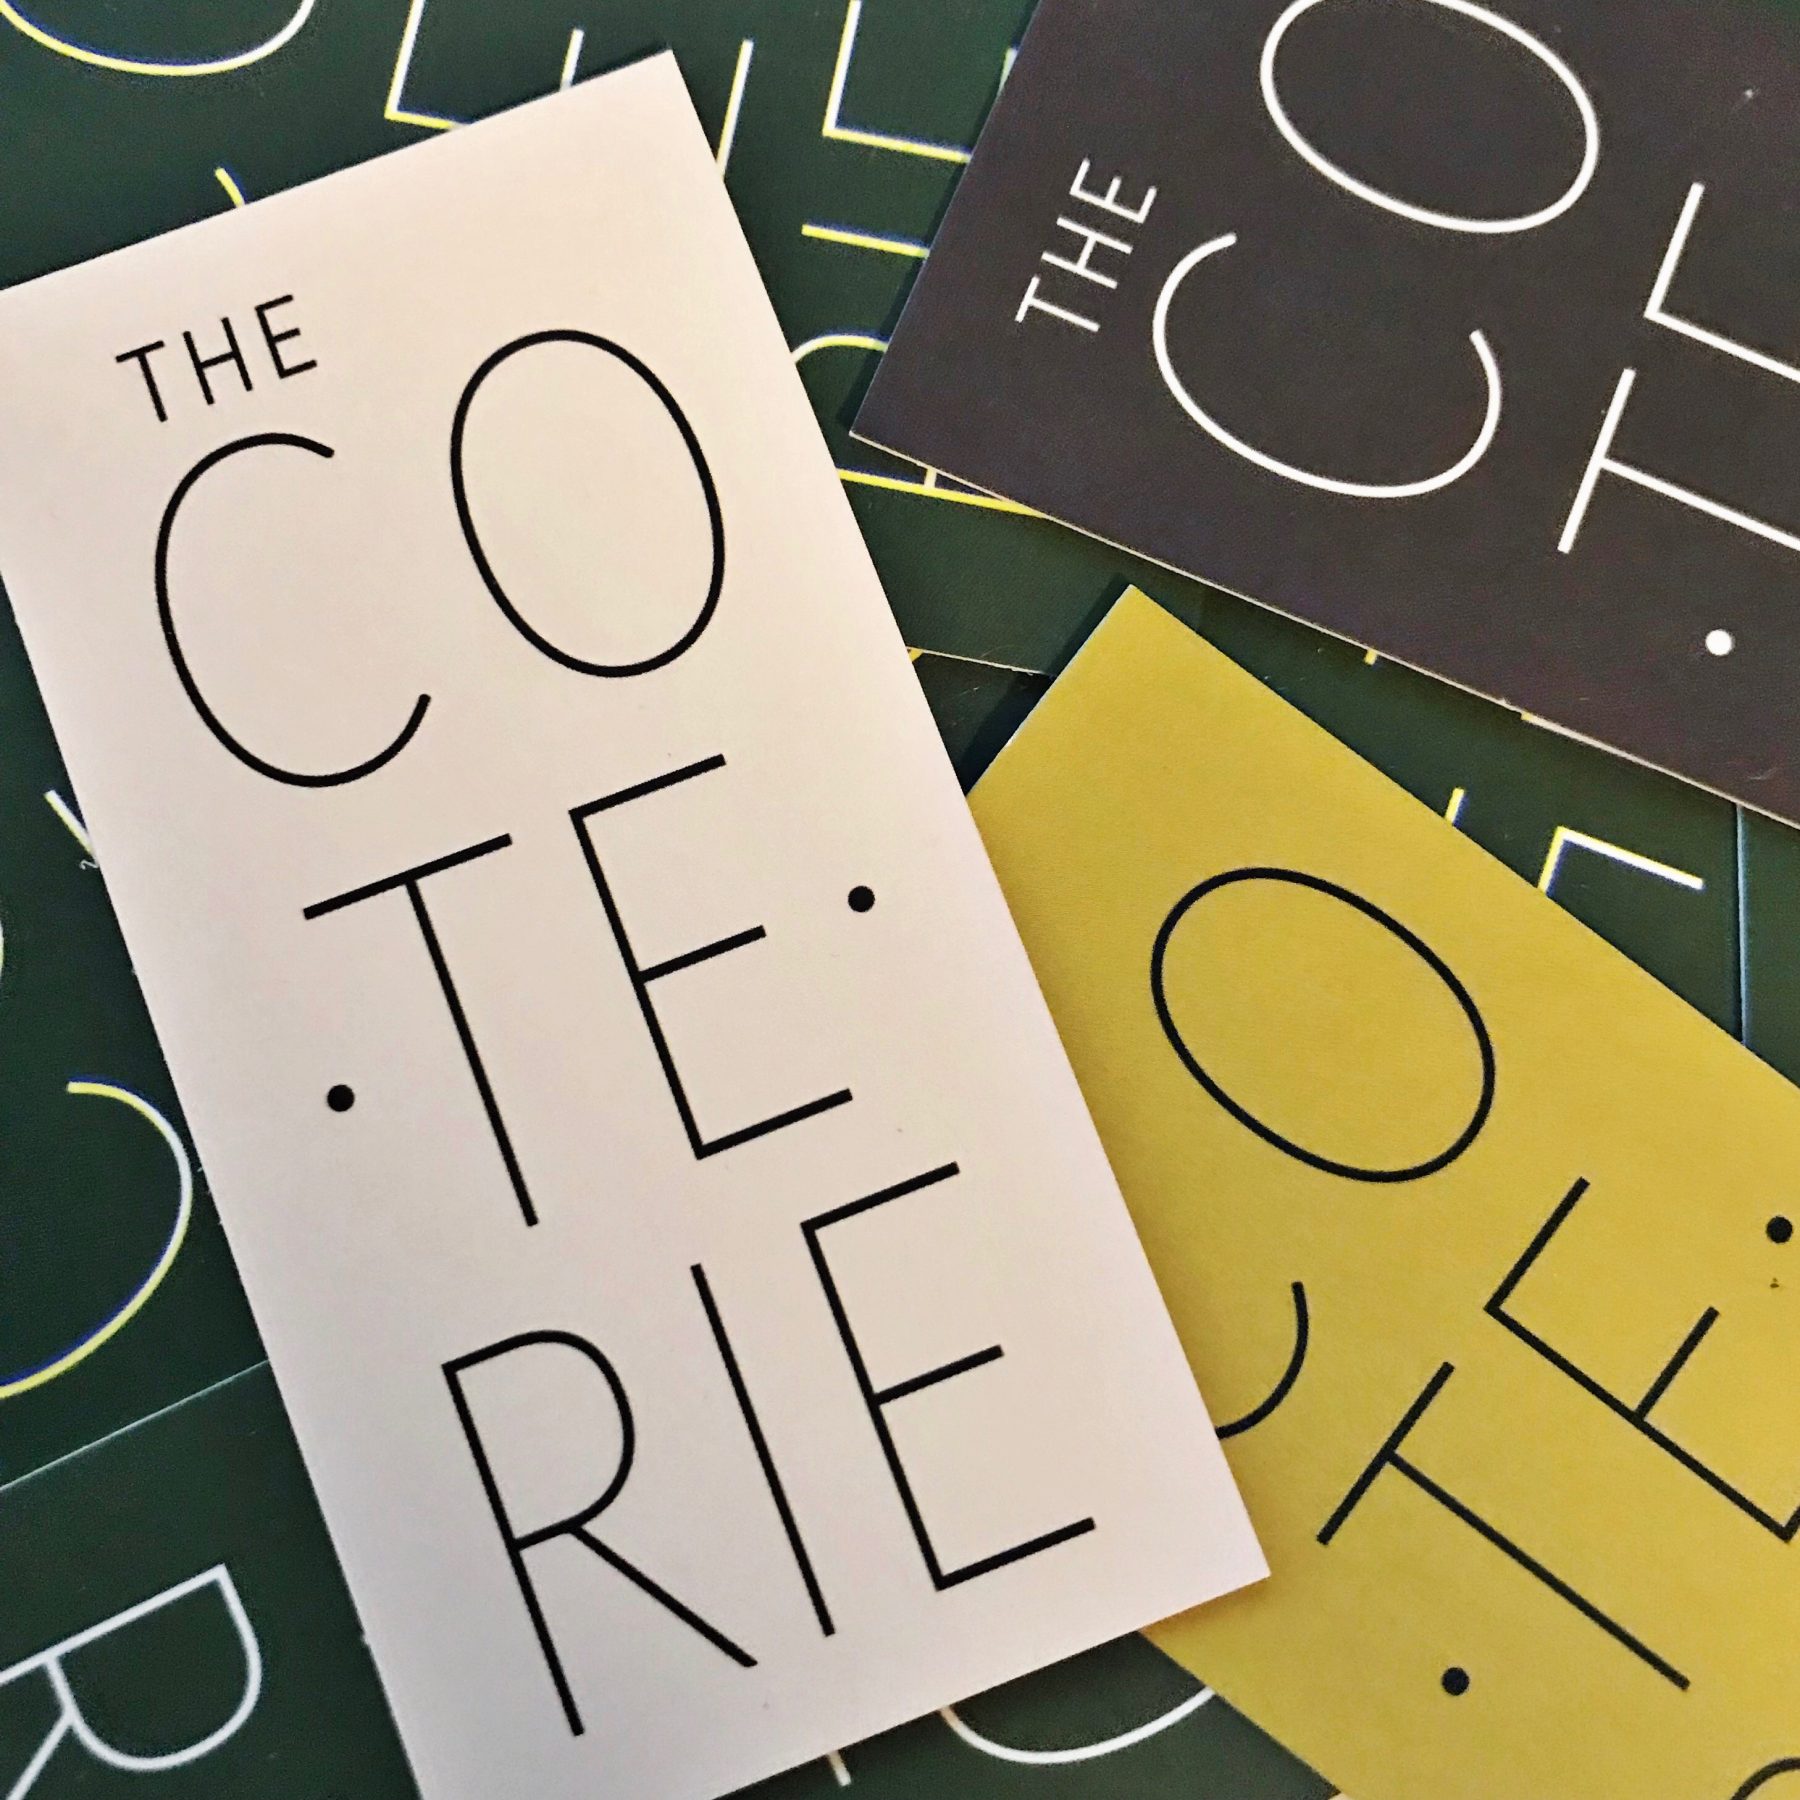 the co.te.rie business cards